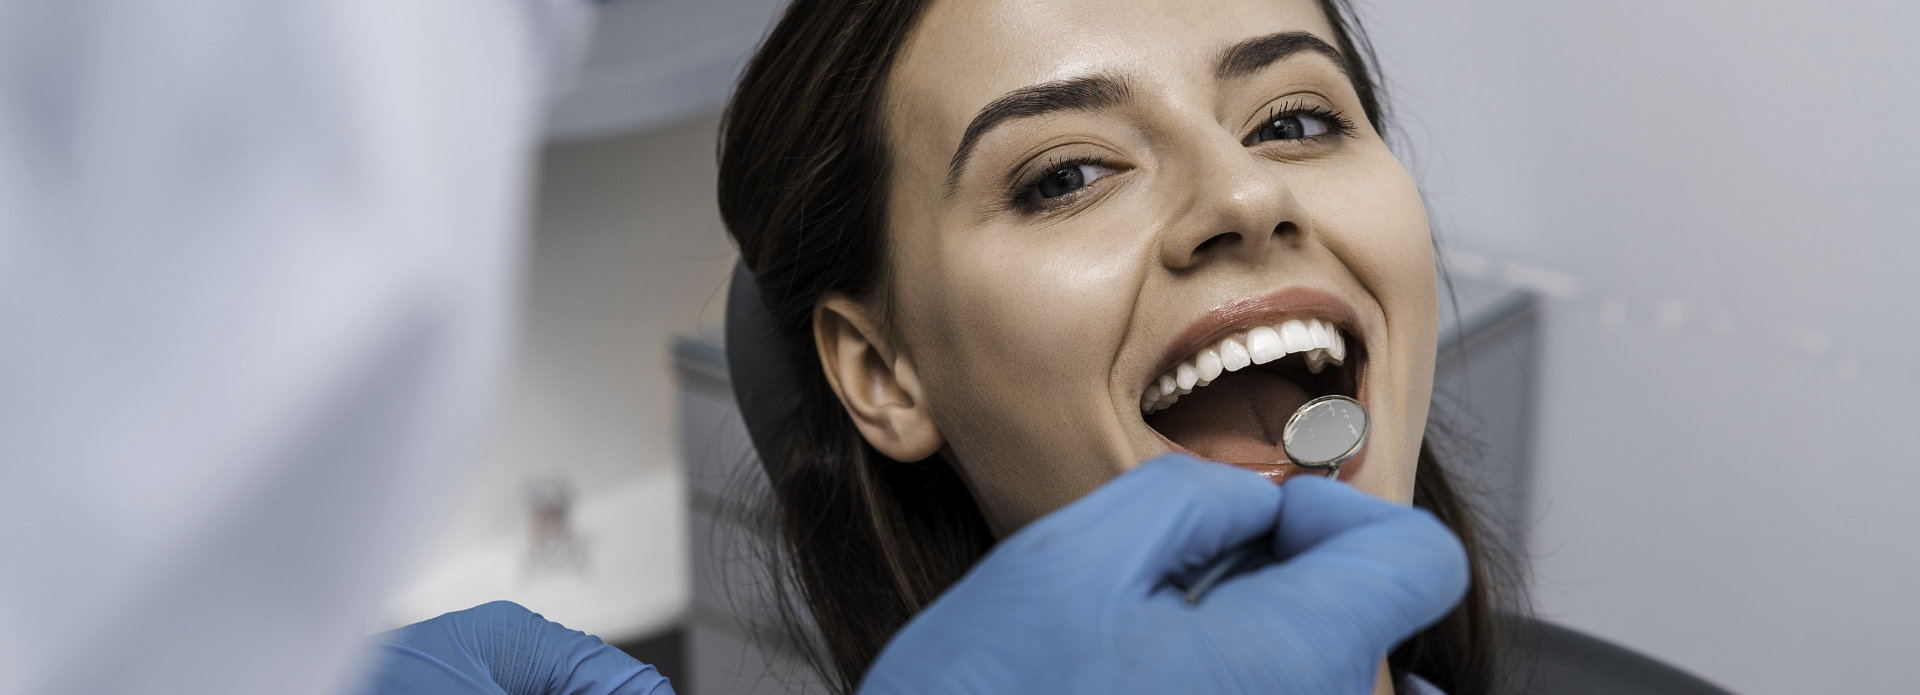 young woman in a dental chair during dental checkup